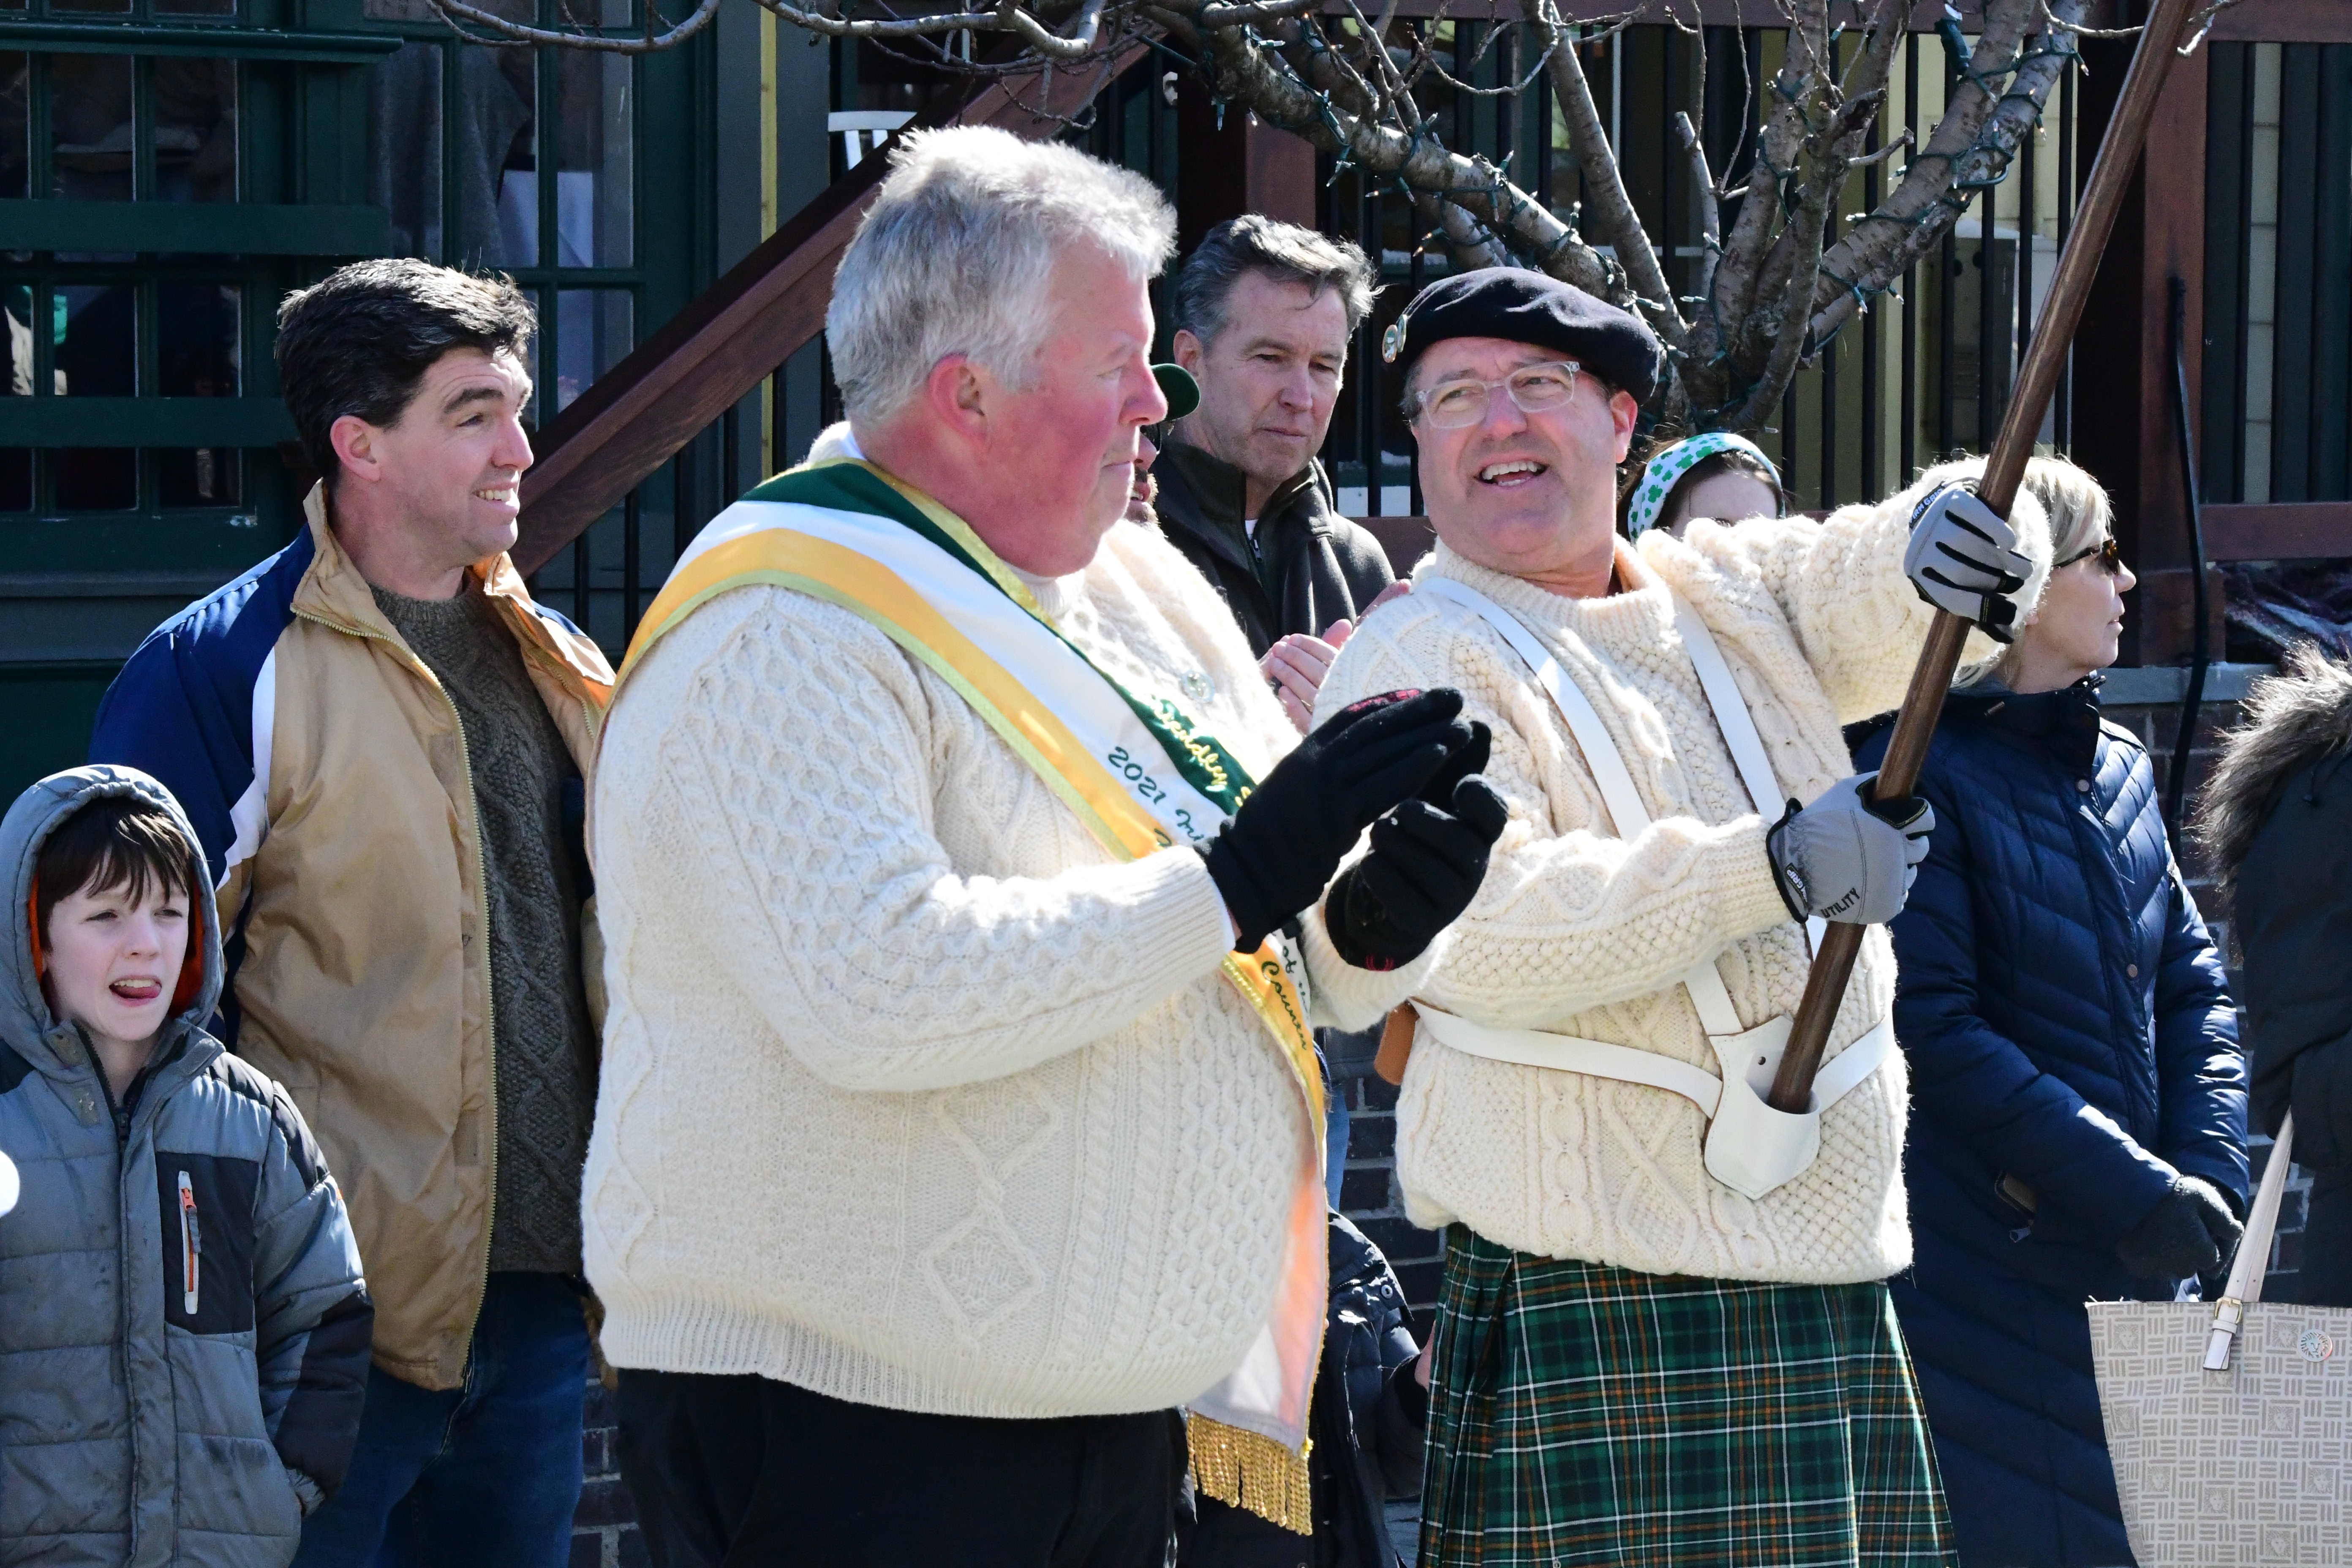 The 2022 St Patrick's Day Parade hosted by the Friendly Sons of St Patrick Hunterdon County took place in Clinton on March 13. Here, members of The Friendly Sons of St. Patrick Hunterdon County.